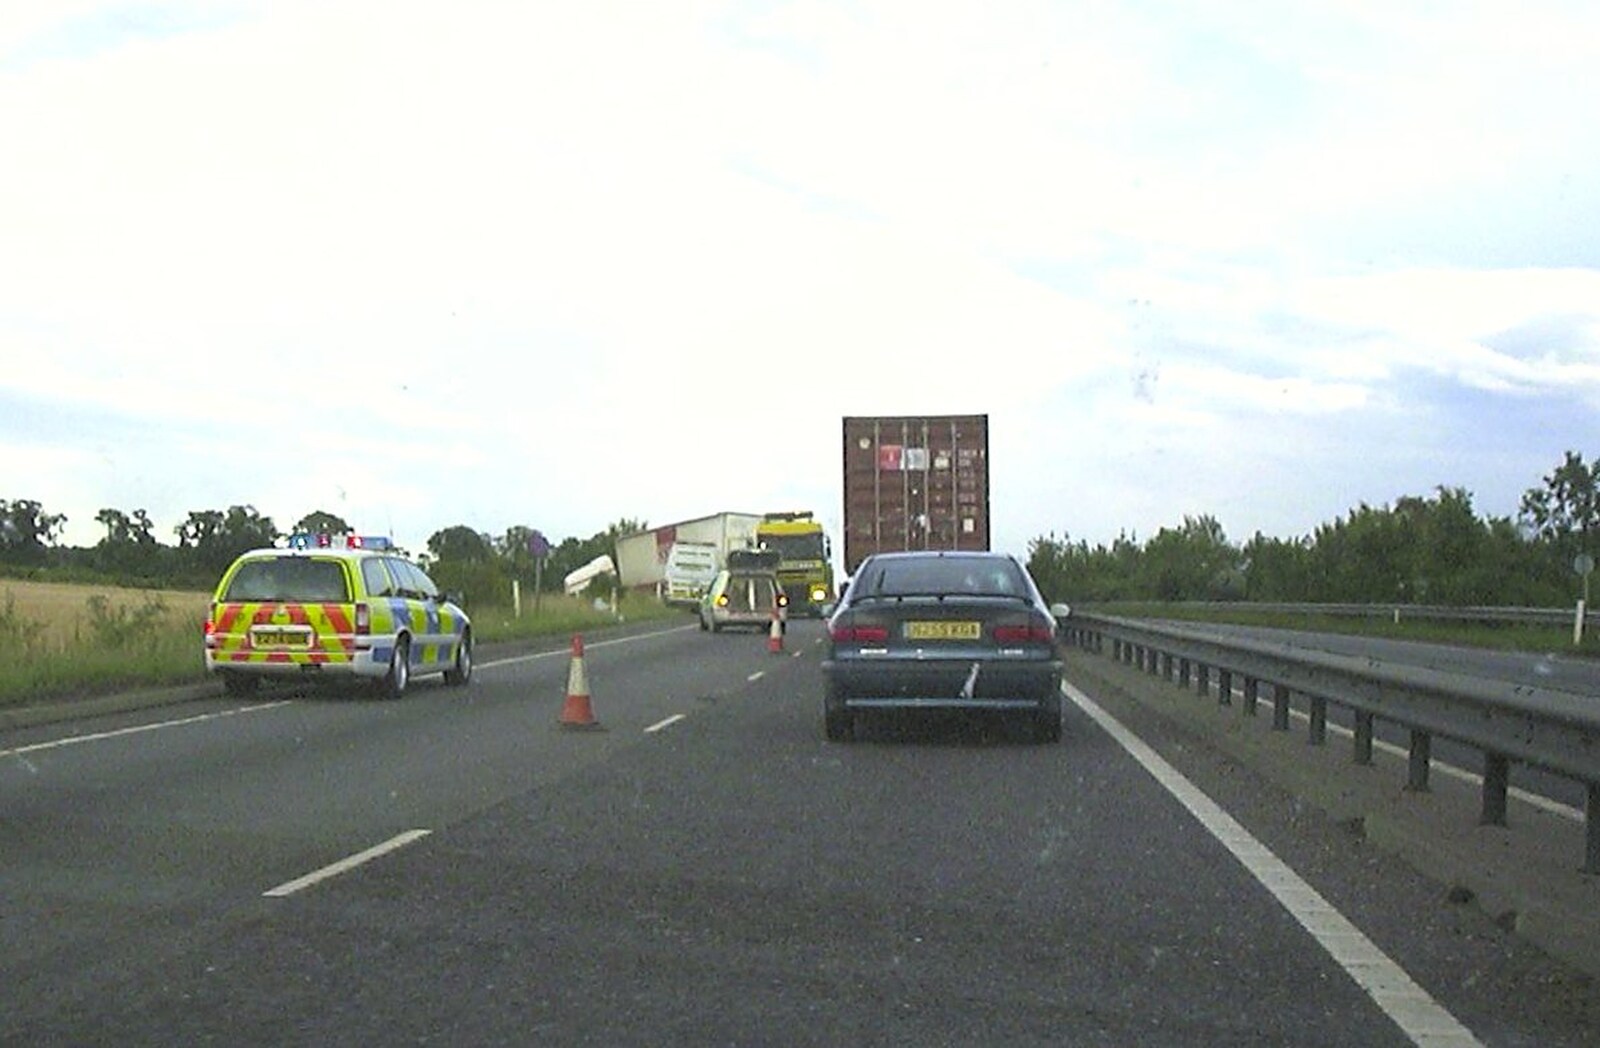 A heavy has driven off the A14 from Longview play Revolution Records, Diss, Norfolk - 2nd July 2004